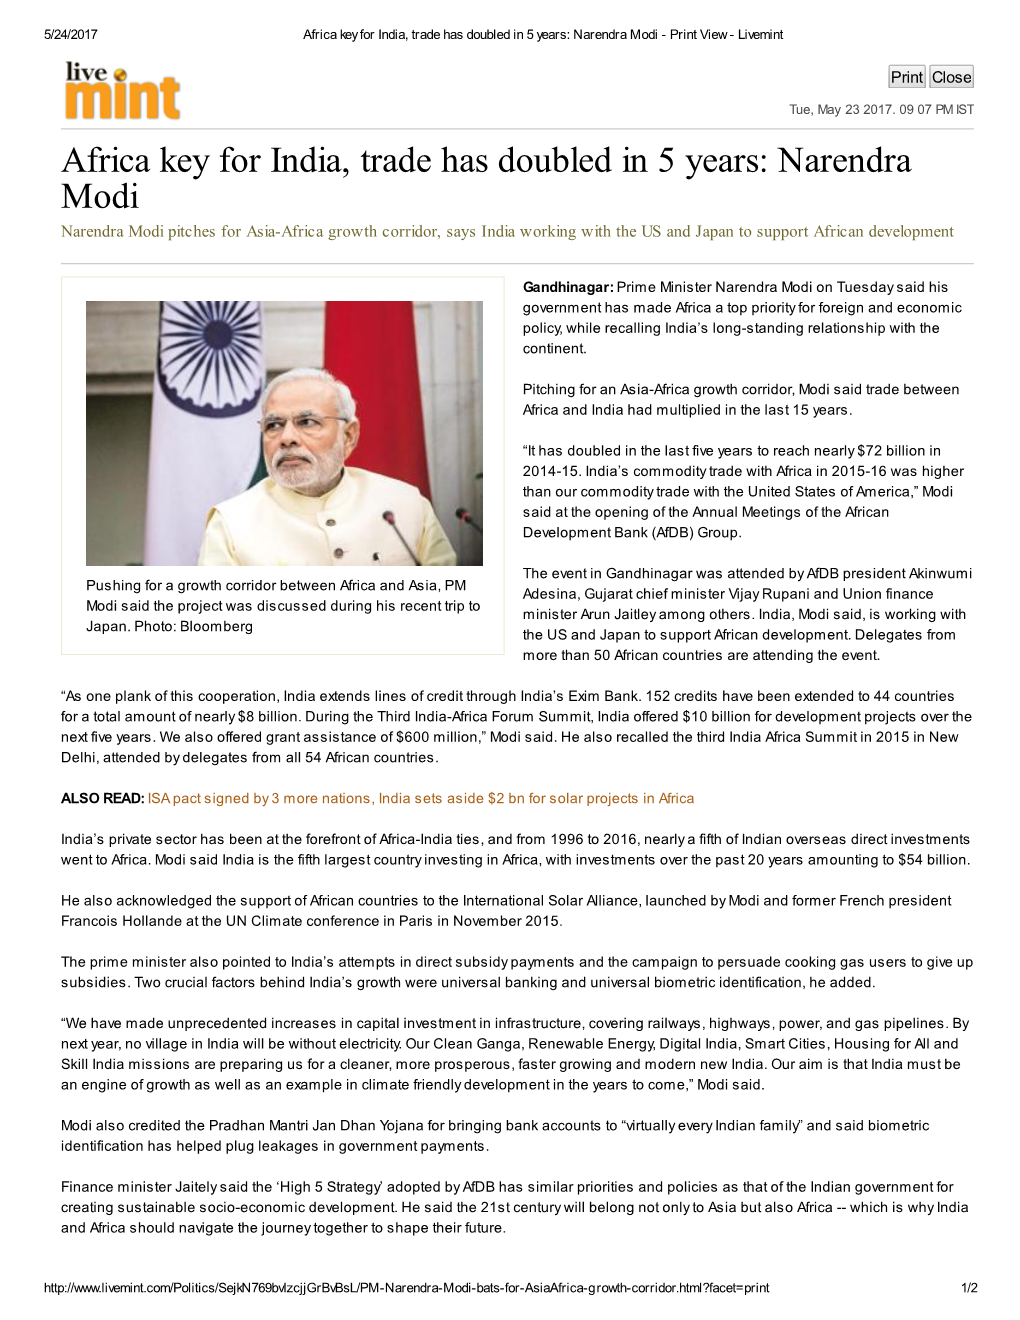 Africa Key for India, Trade Has Doubled in 5 Years: Narendra Modi ­ Print View ­ Livemint